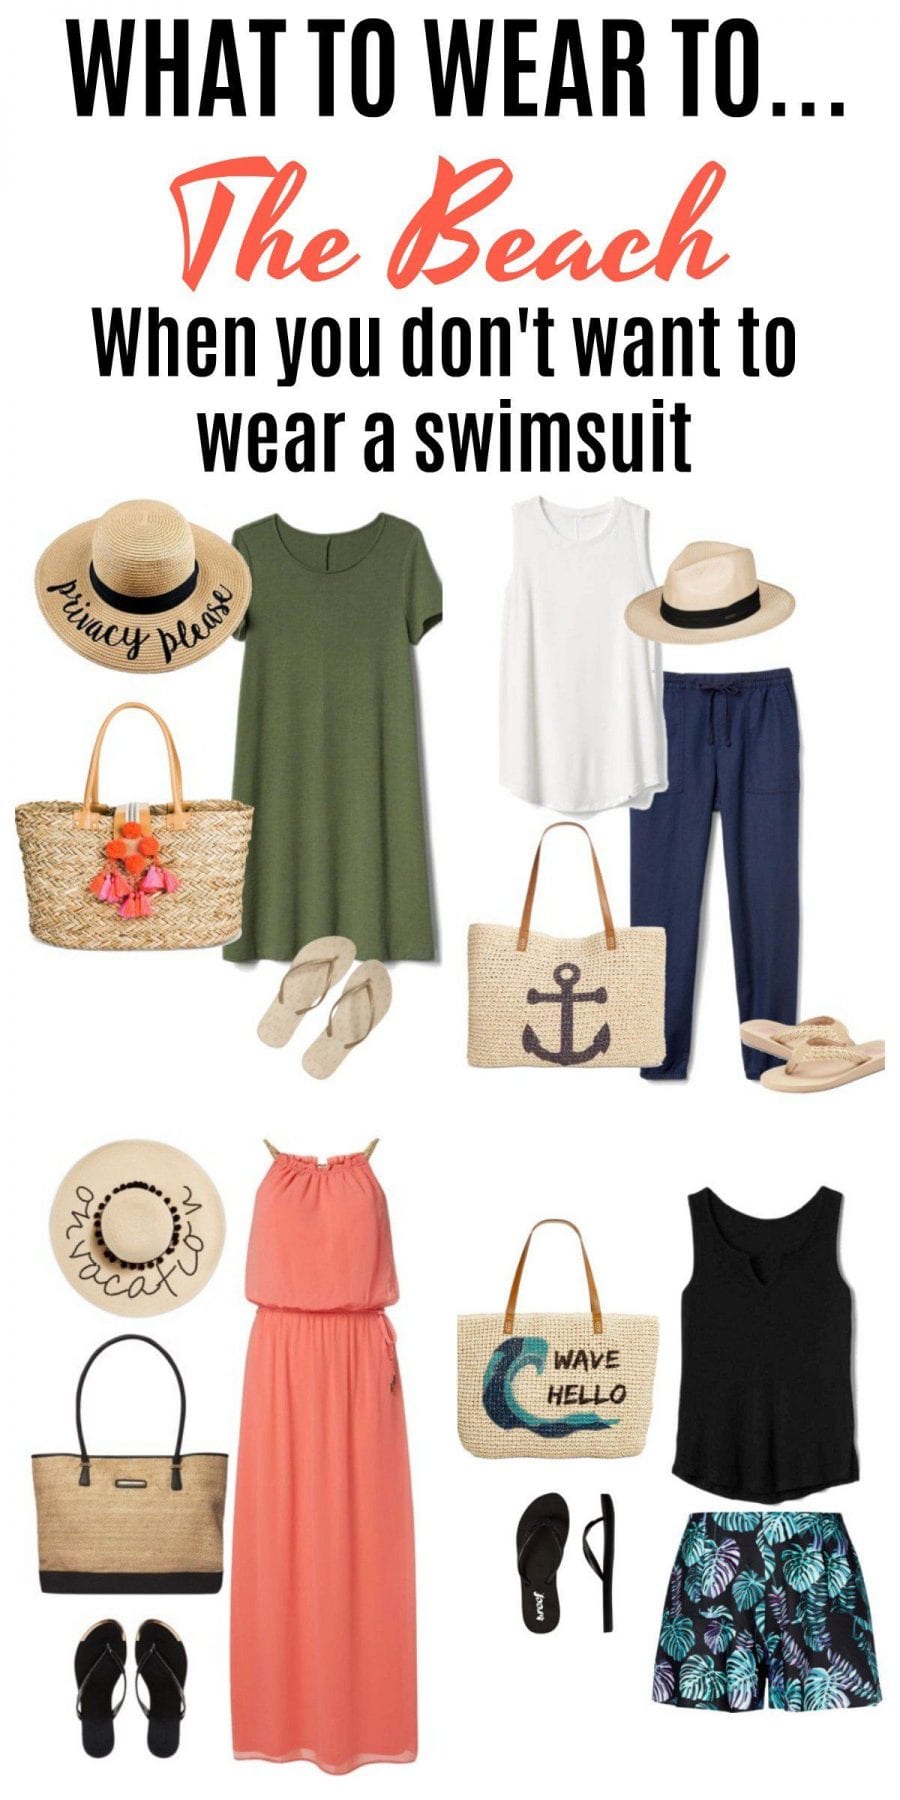 What To Wear To The Beach If You Don't Want To Wear or Have Swimsuit - Swimsuits  Alternatives